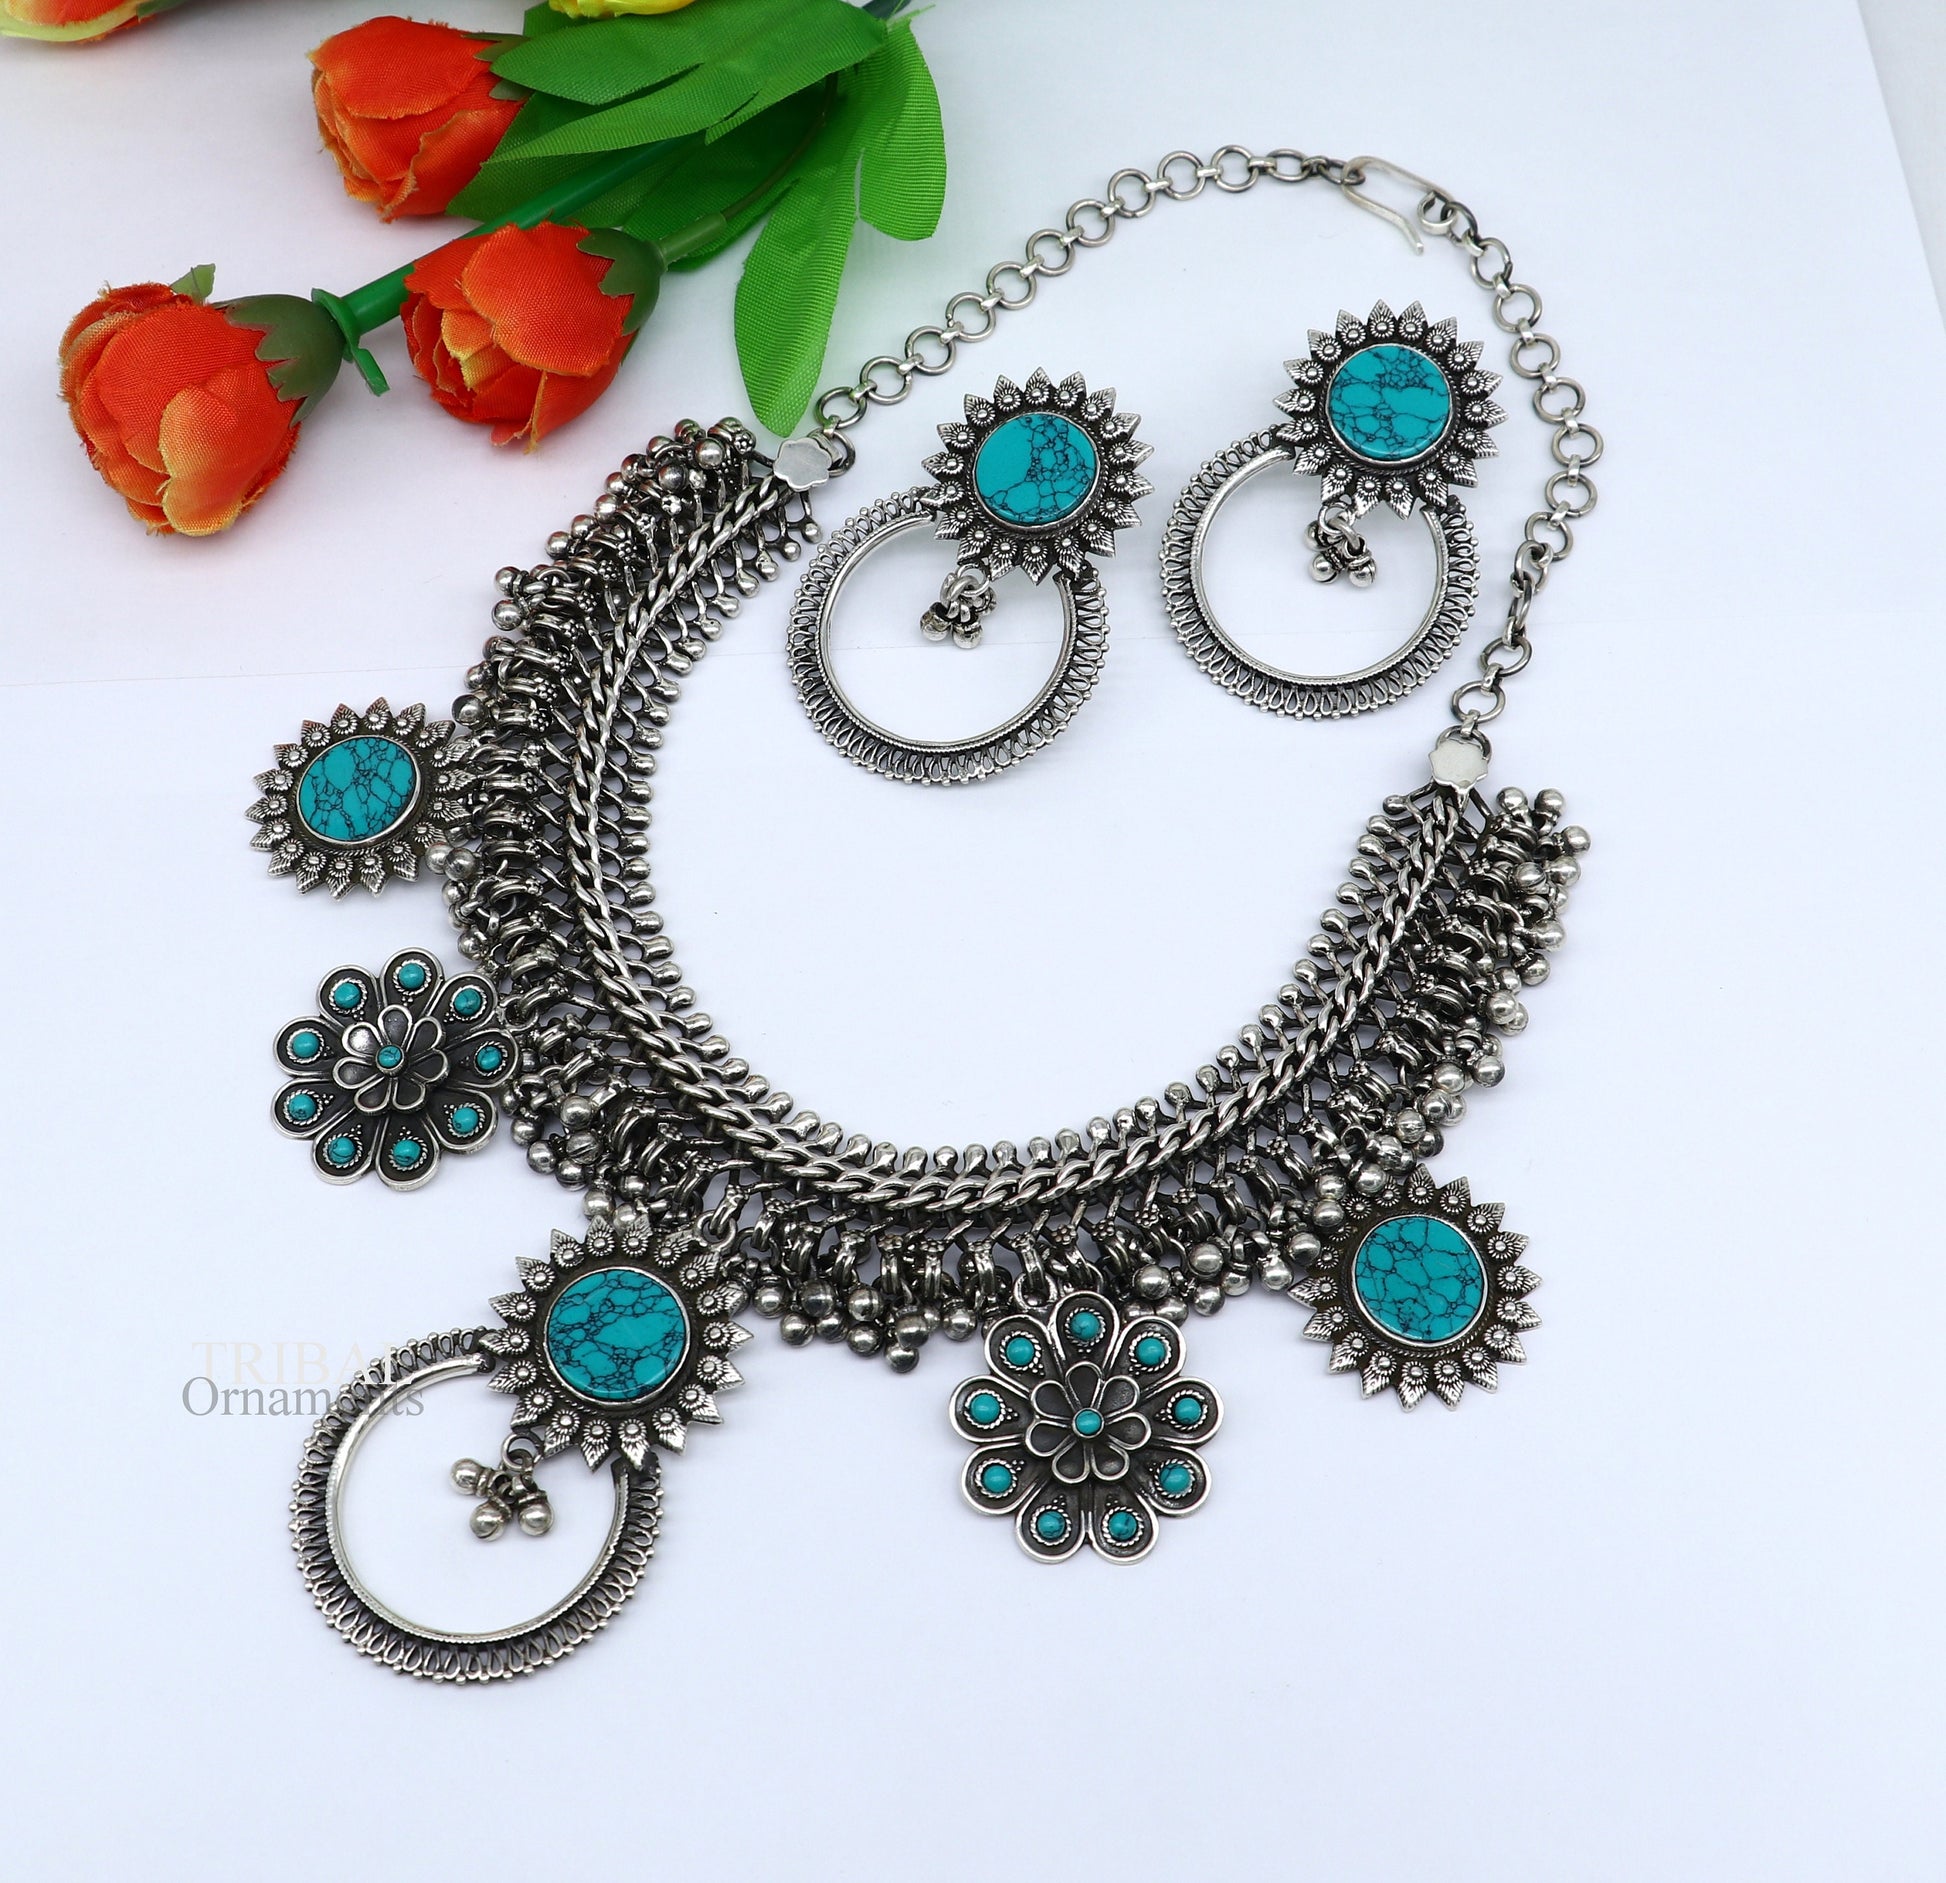 925 sterling silver handcrafted vintage design ethnic charm necklace excellent gifting tribal brides belly dance jewelry india set292 - TRIBAL ORNAMENTS